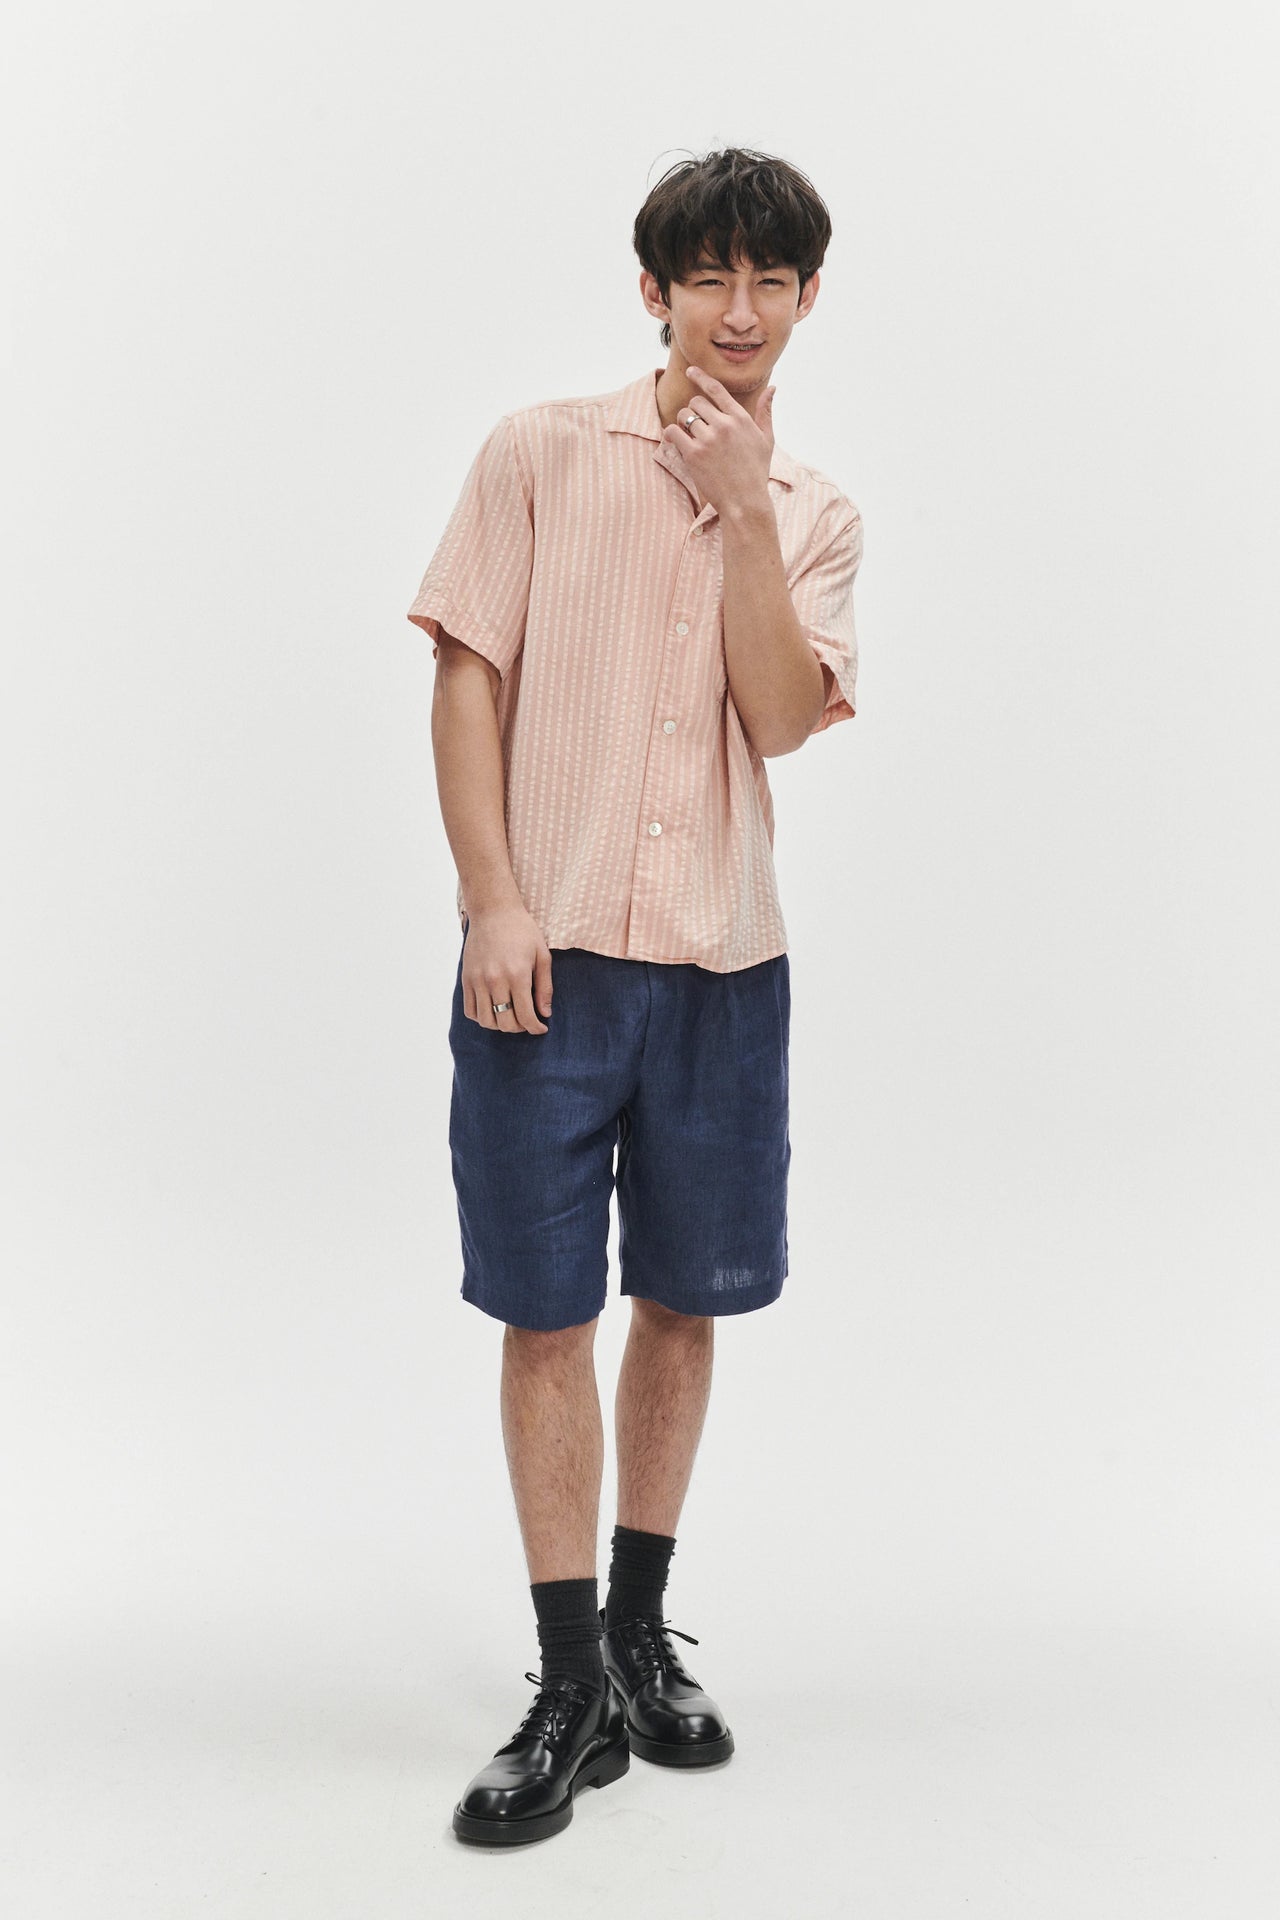 Short Sleeve Camp Collar Shirt in a Peach Pink Striped Soft Portuguese Lyocell